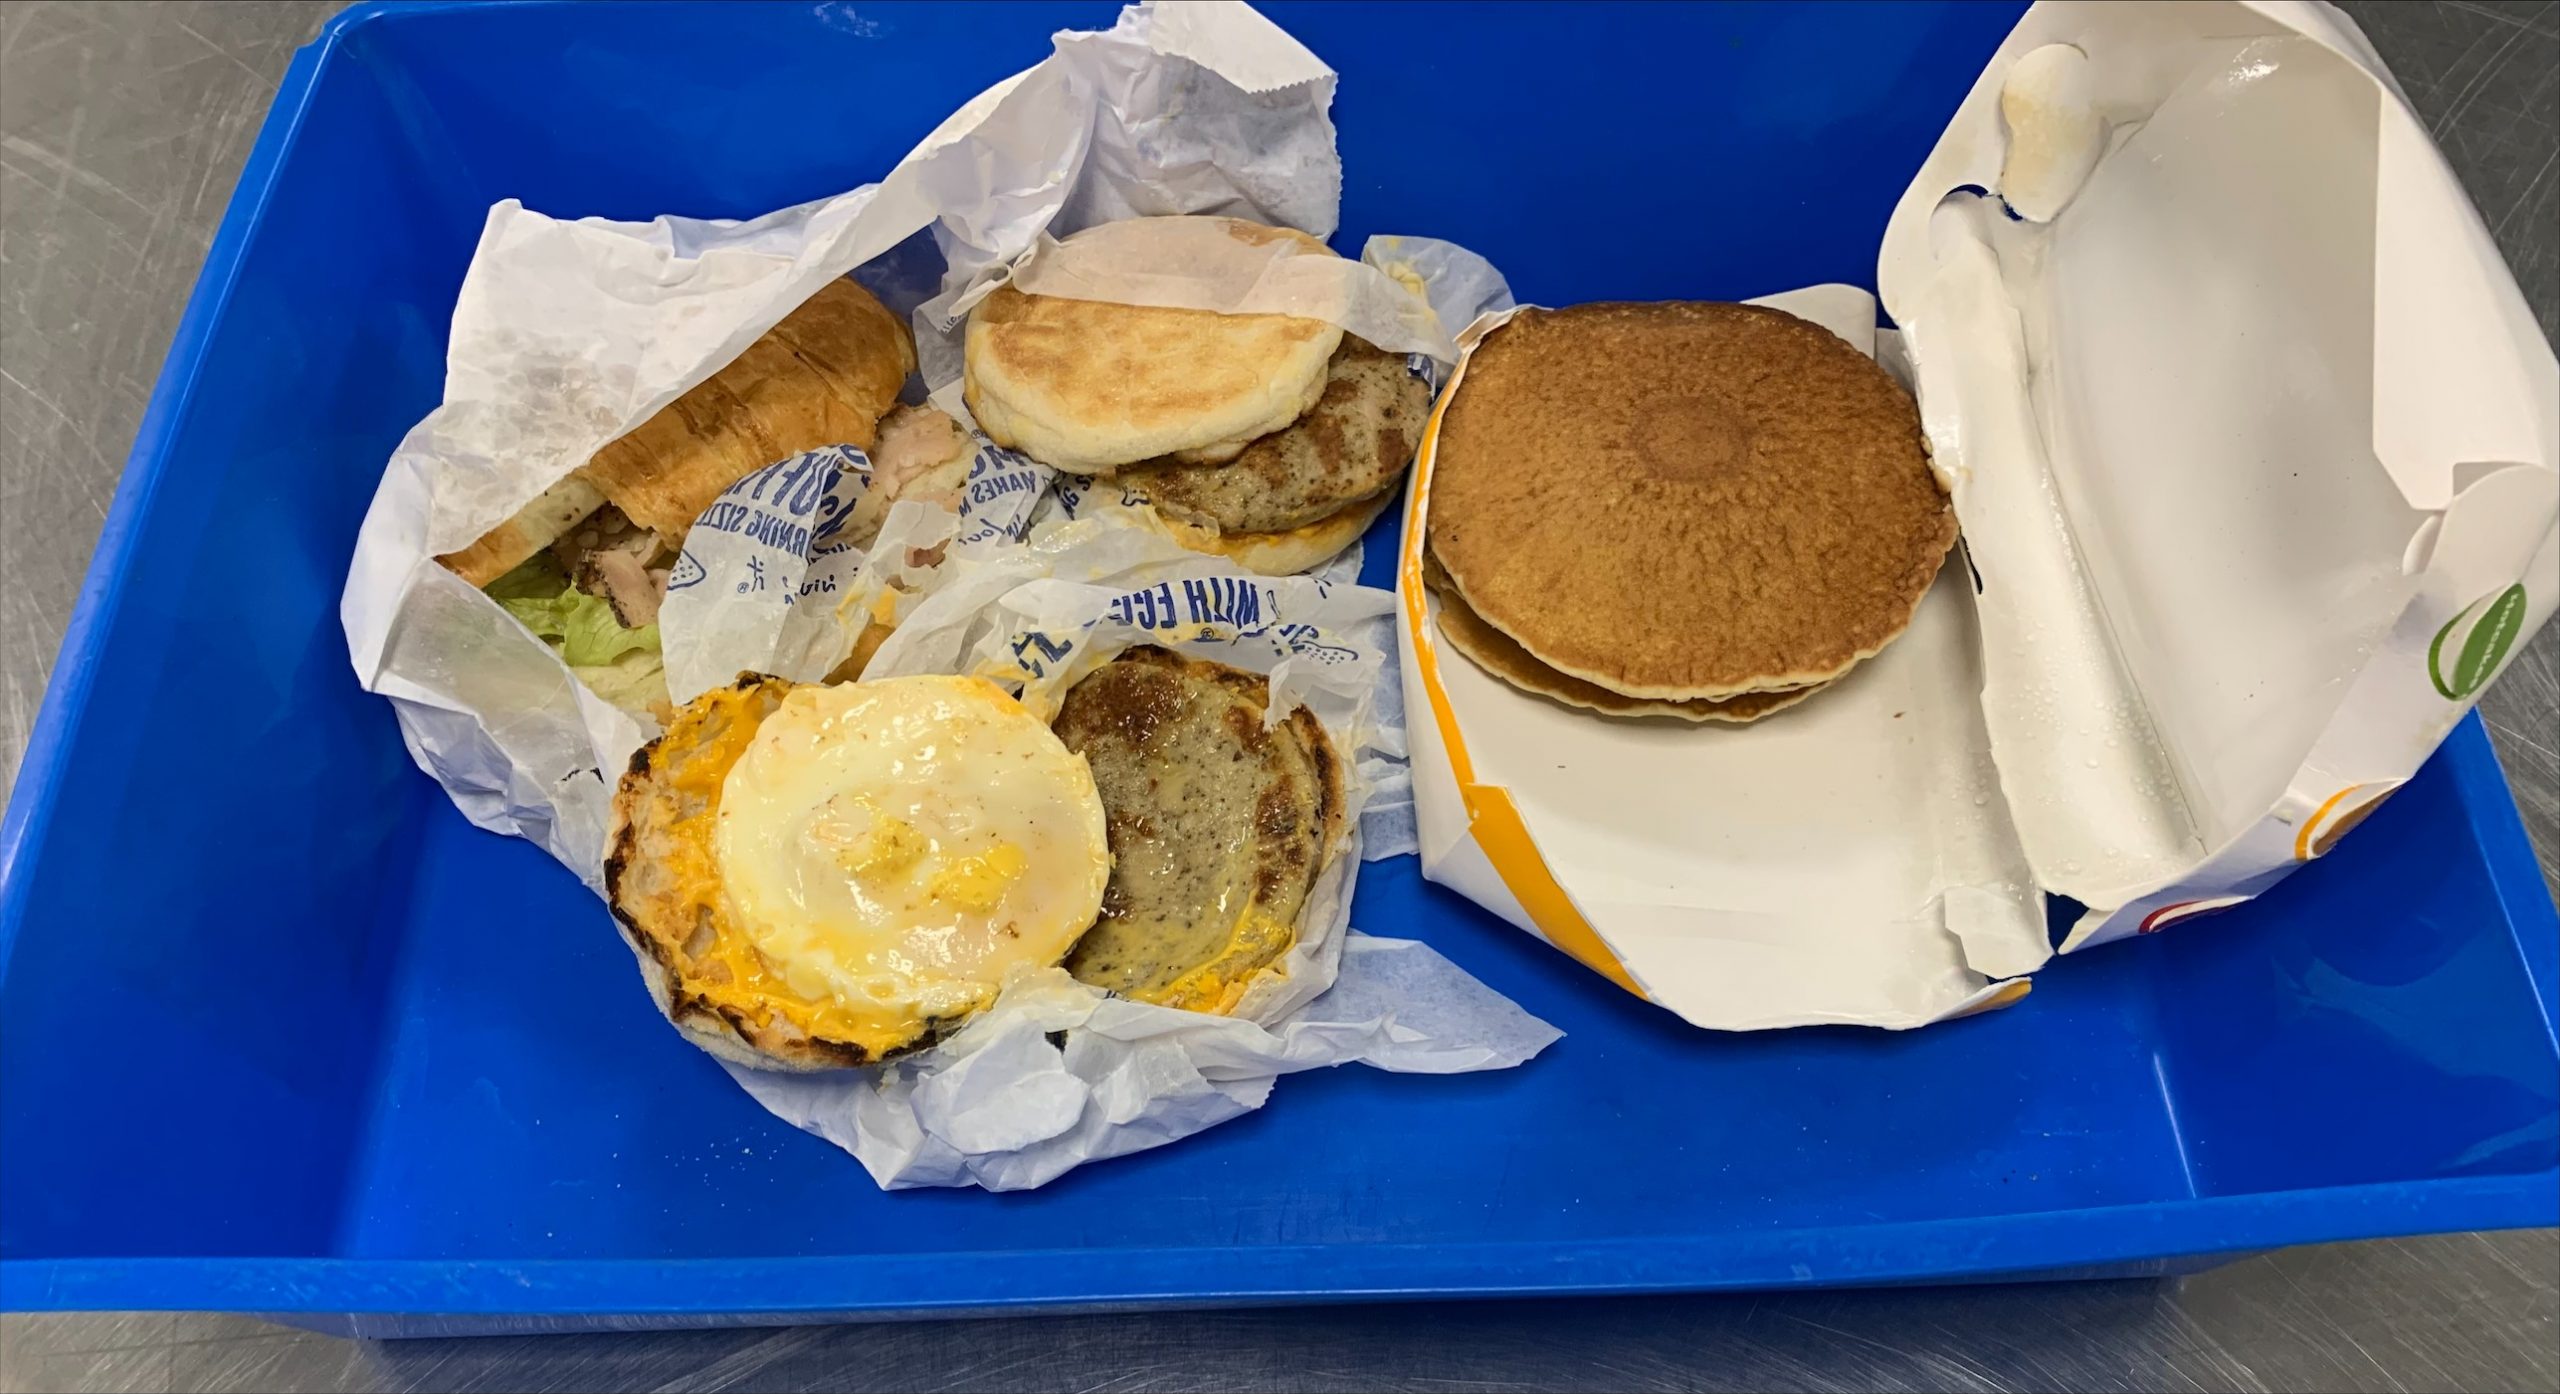 The confiscated foods discovered by the authorities are a ham croissant and two egg and sausage McMuffins in a blue container